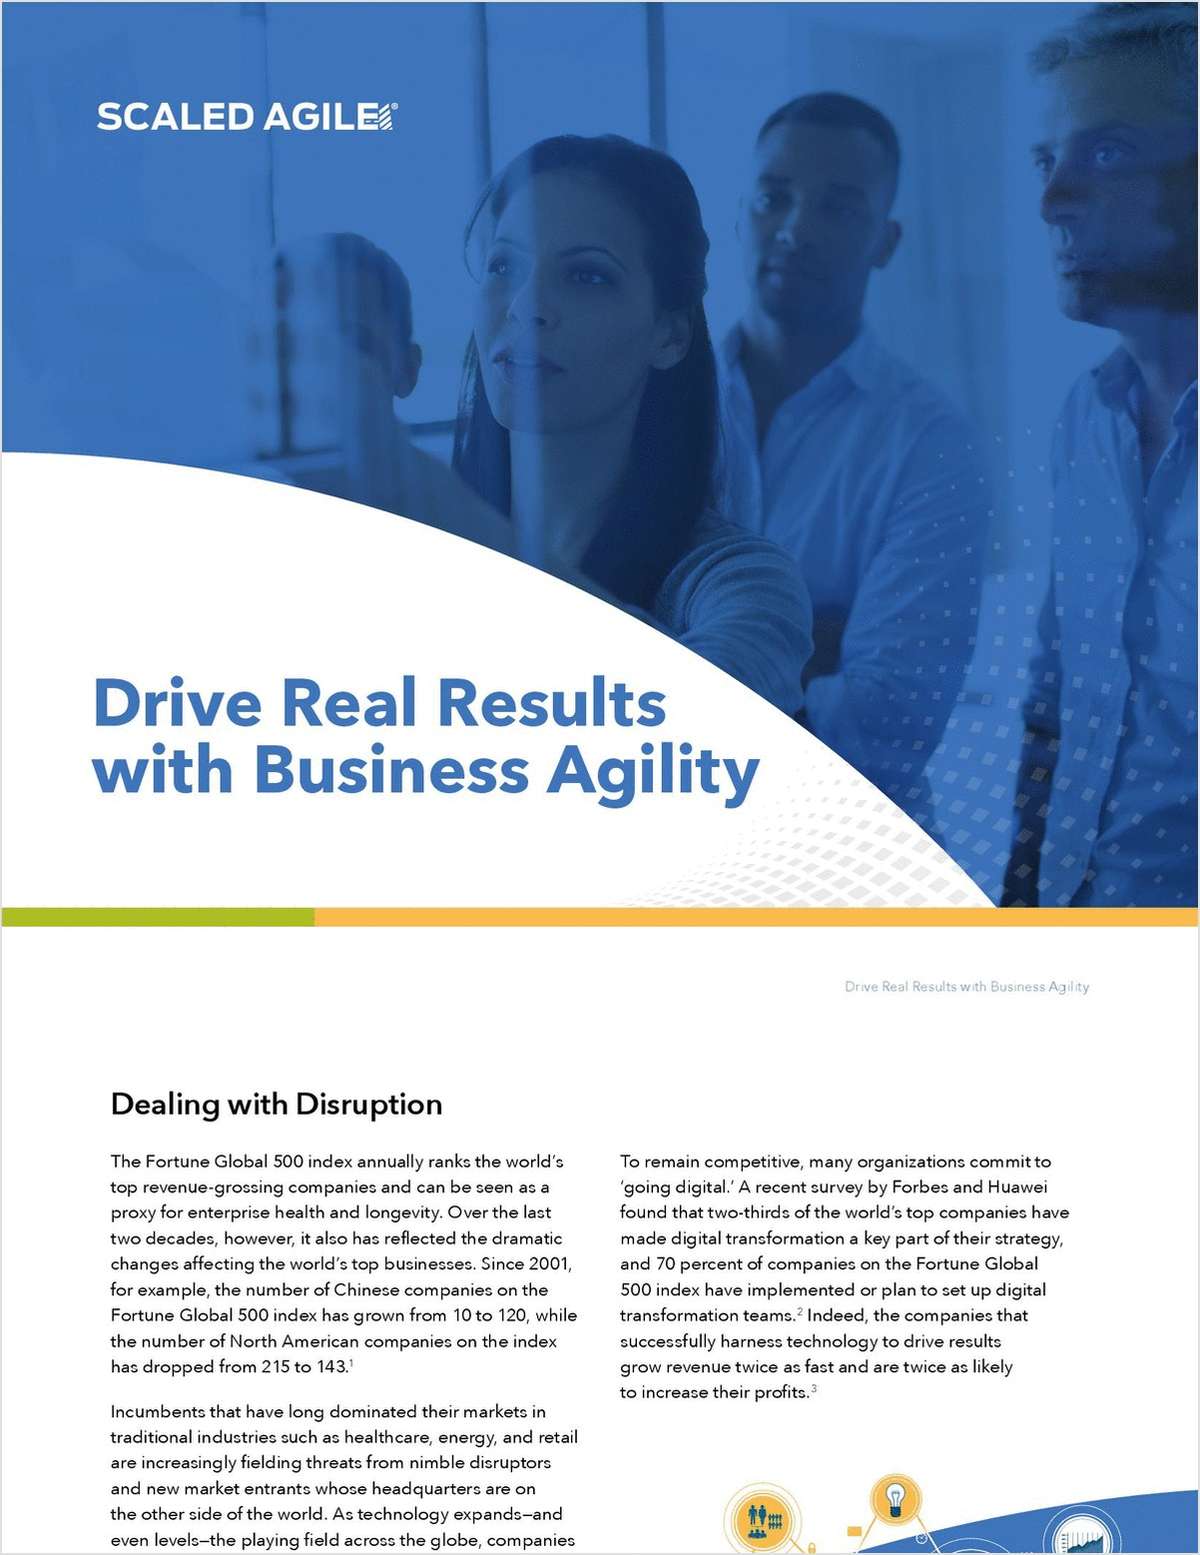 Drive Real Results with Business Agility